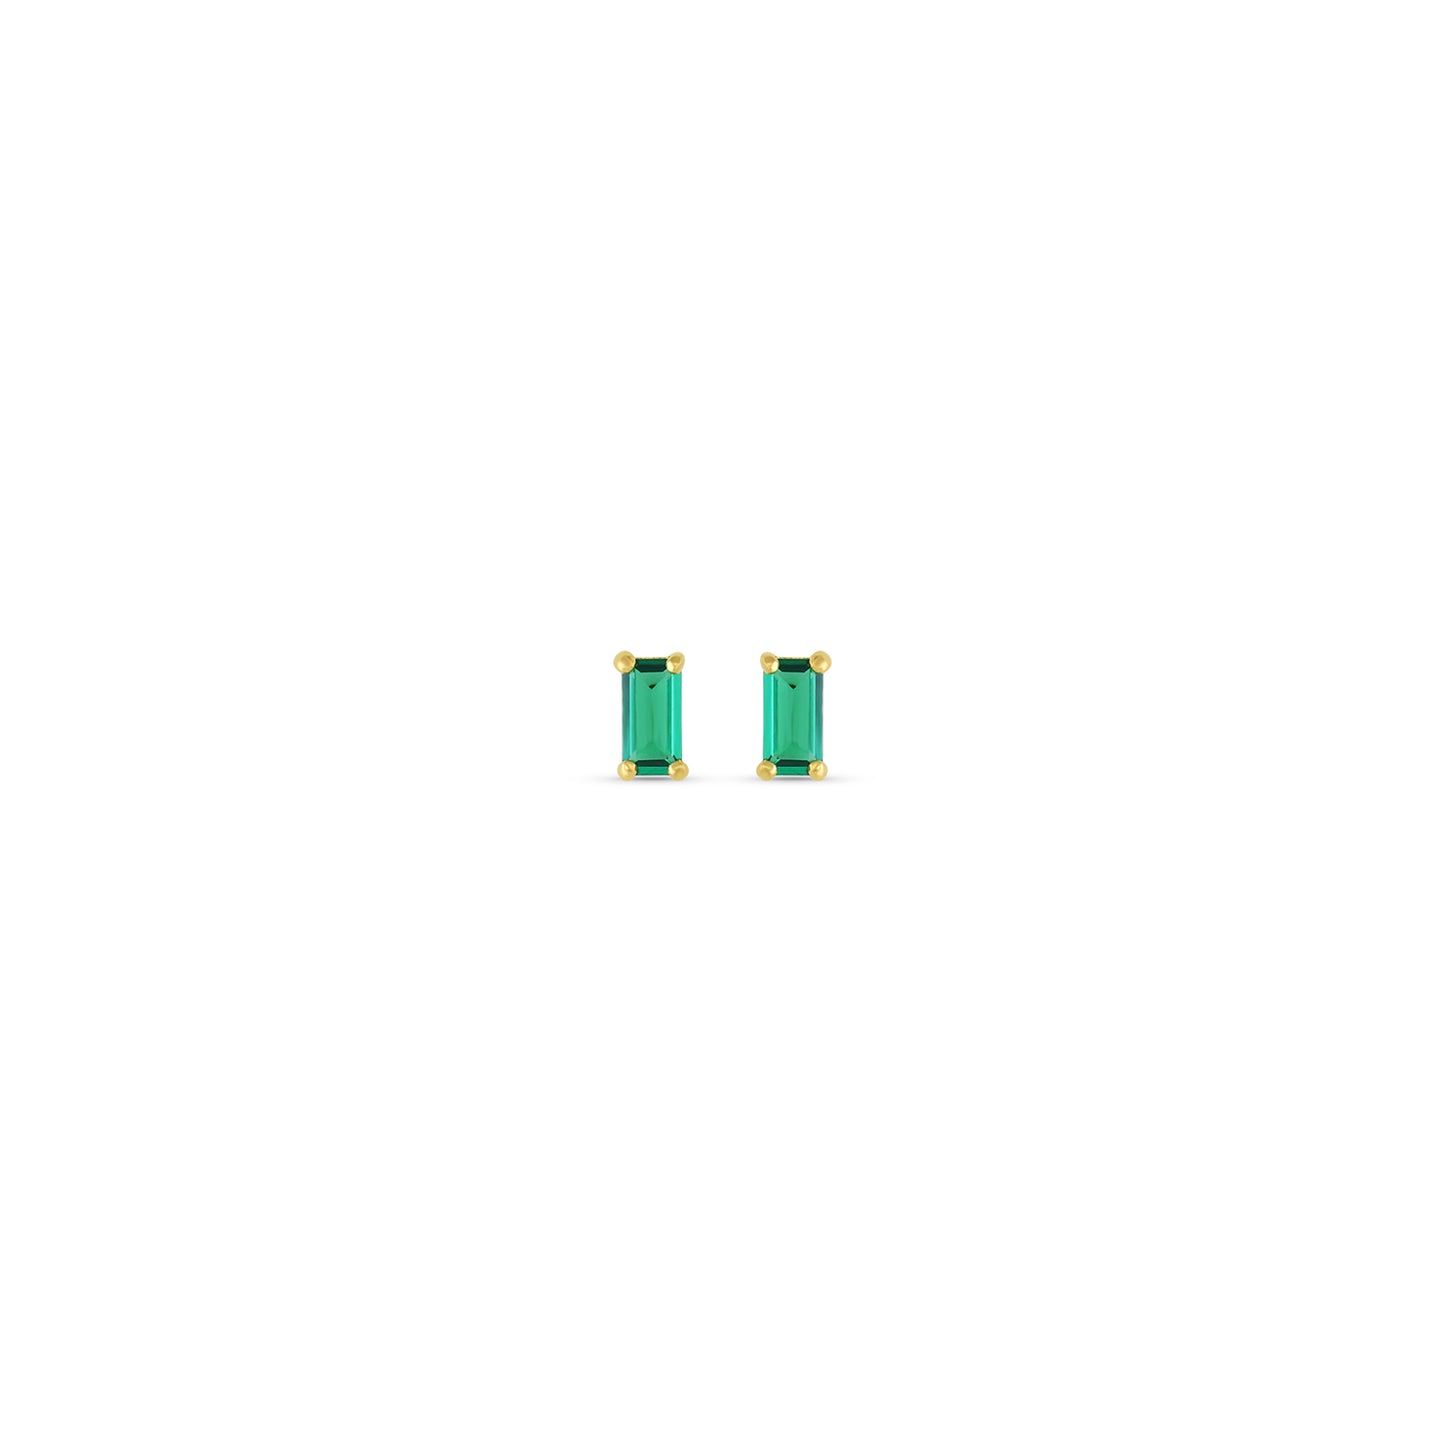 Pia Emerald Earrings Gold Filled